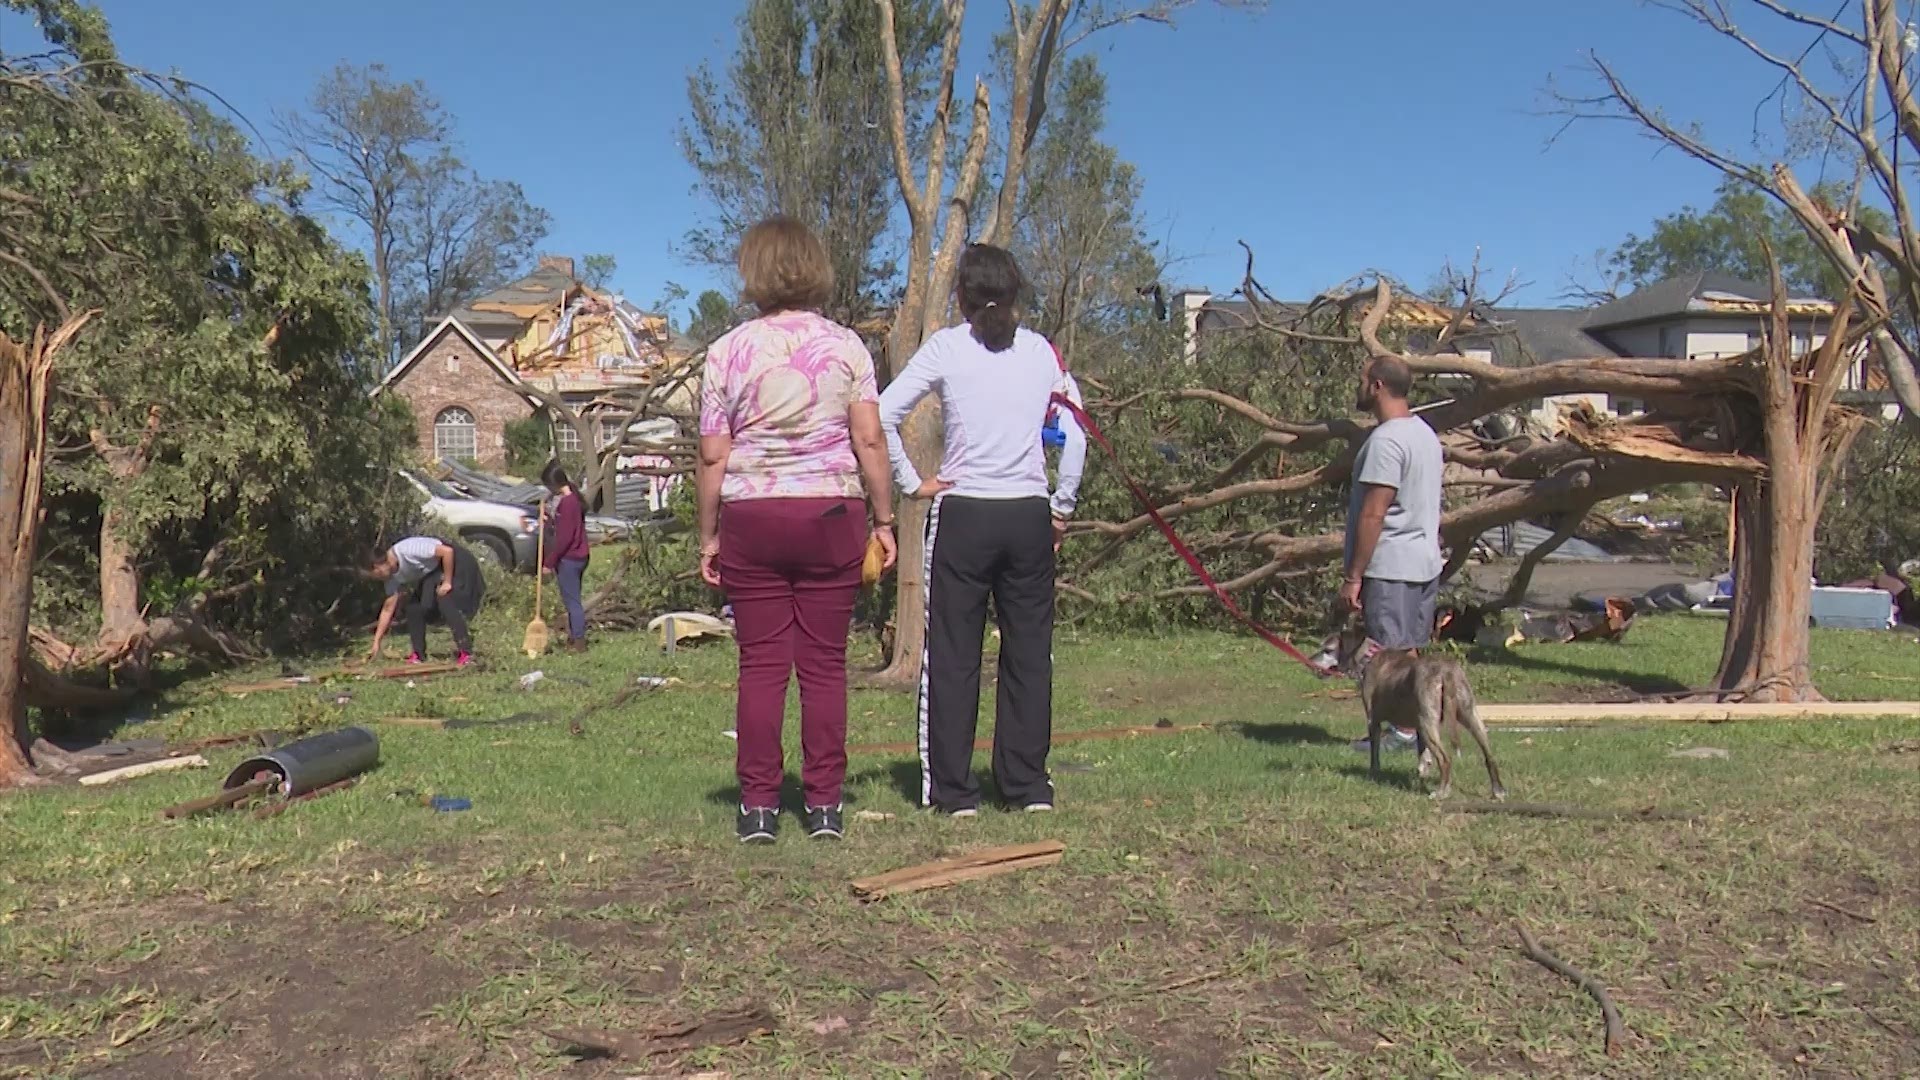 Many people have been affected by the tornado that ripped through Dallas, but just as many organizations and businesses have stepped up to help however they can.